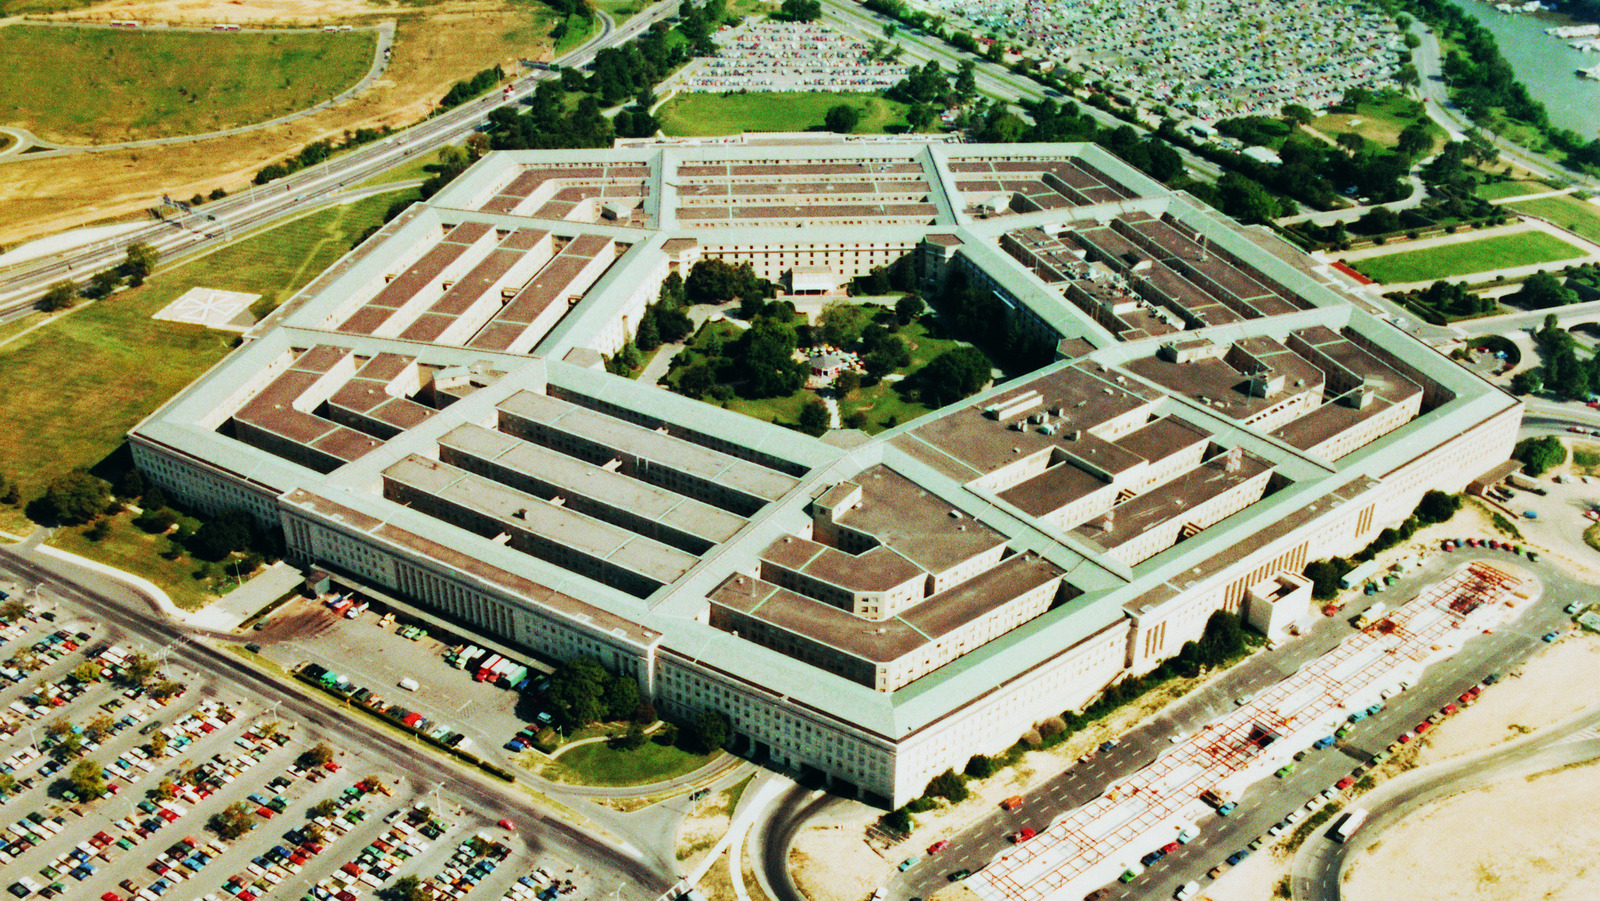 Why The Pentagon Is Shaped Like A Pentagon